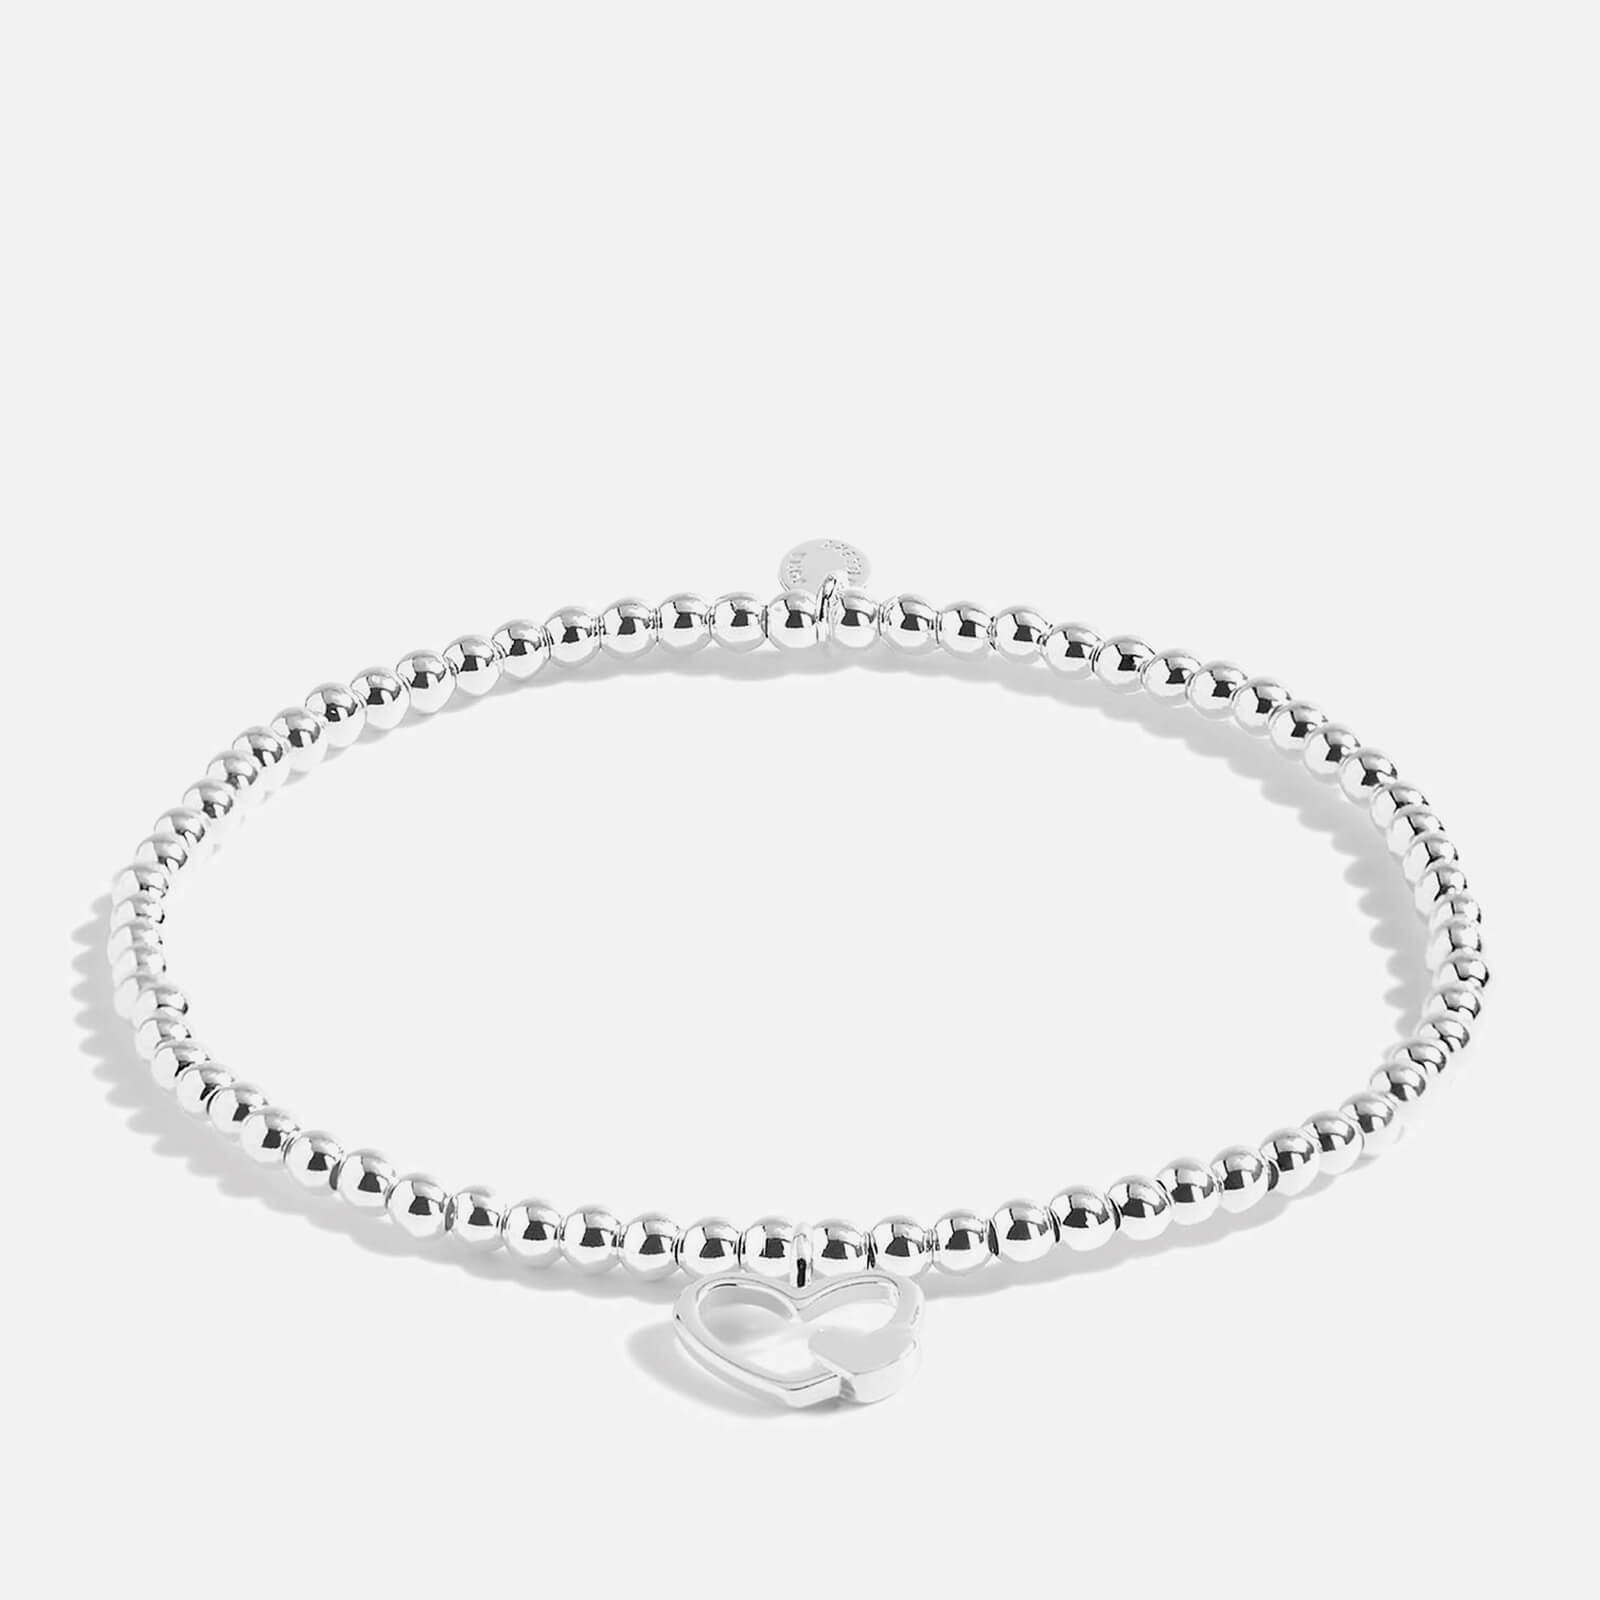 Joma Jewellery Oh So Sweet Mother’s Day Silver-Tone Bracelet